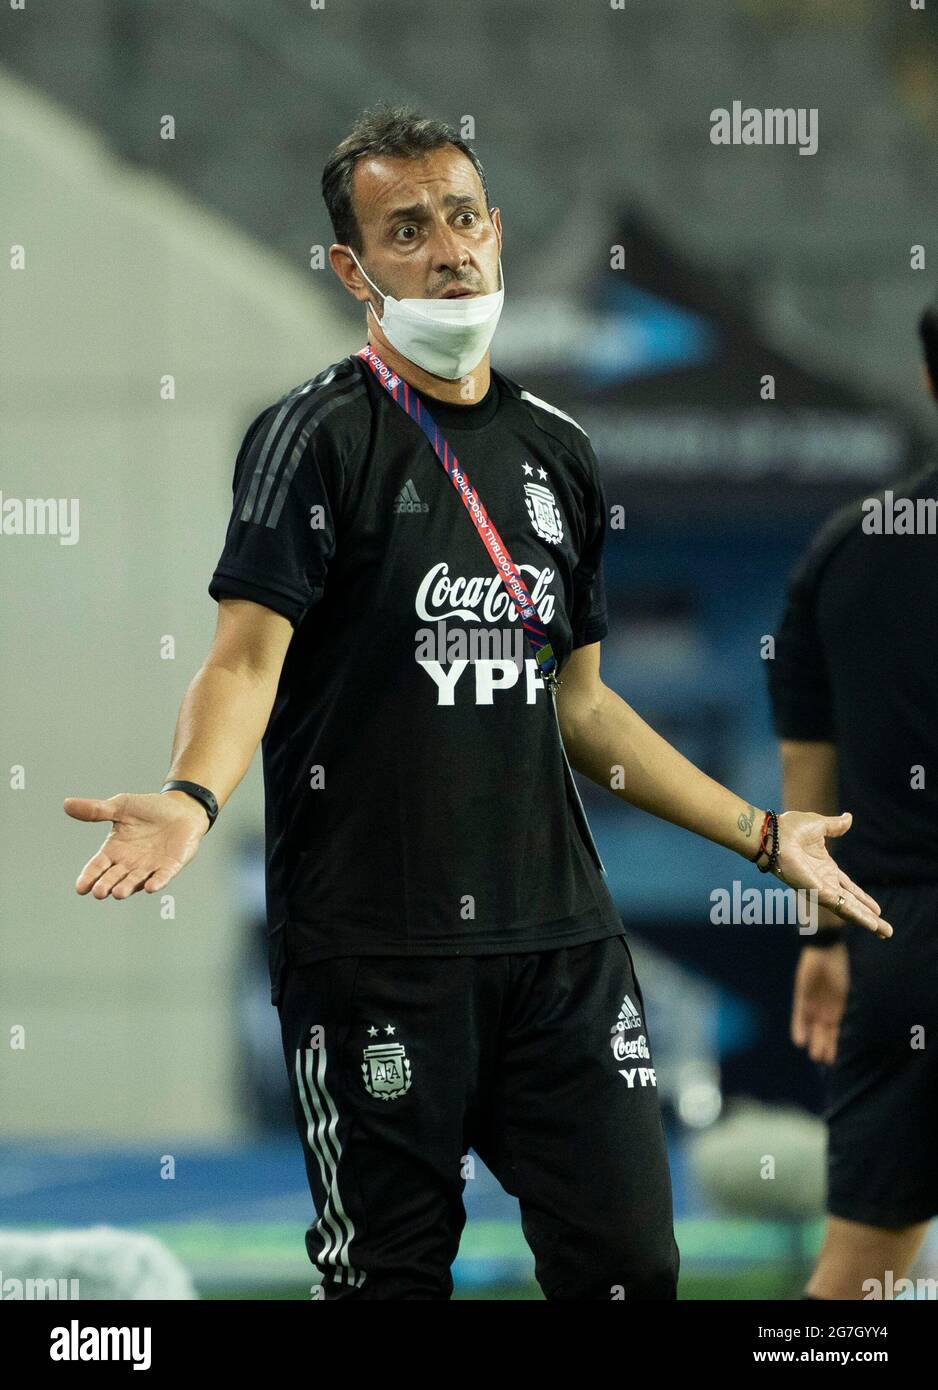 July 13, 2021 - Yongin, South Korea : Argentina soccer team Coach Batista Fernando, action during the 2020 Tokyo Olympic men's soccer team friendly match between South Korea and Argentina at Yongin Mireu Stadium in Yongin, Gyeonggi Province, South Korea on July 13, 2021. South Korea-Argentina score 2-2. (Photo by Lee Young-ho/Sipa USA) Stock Photo